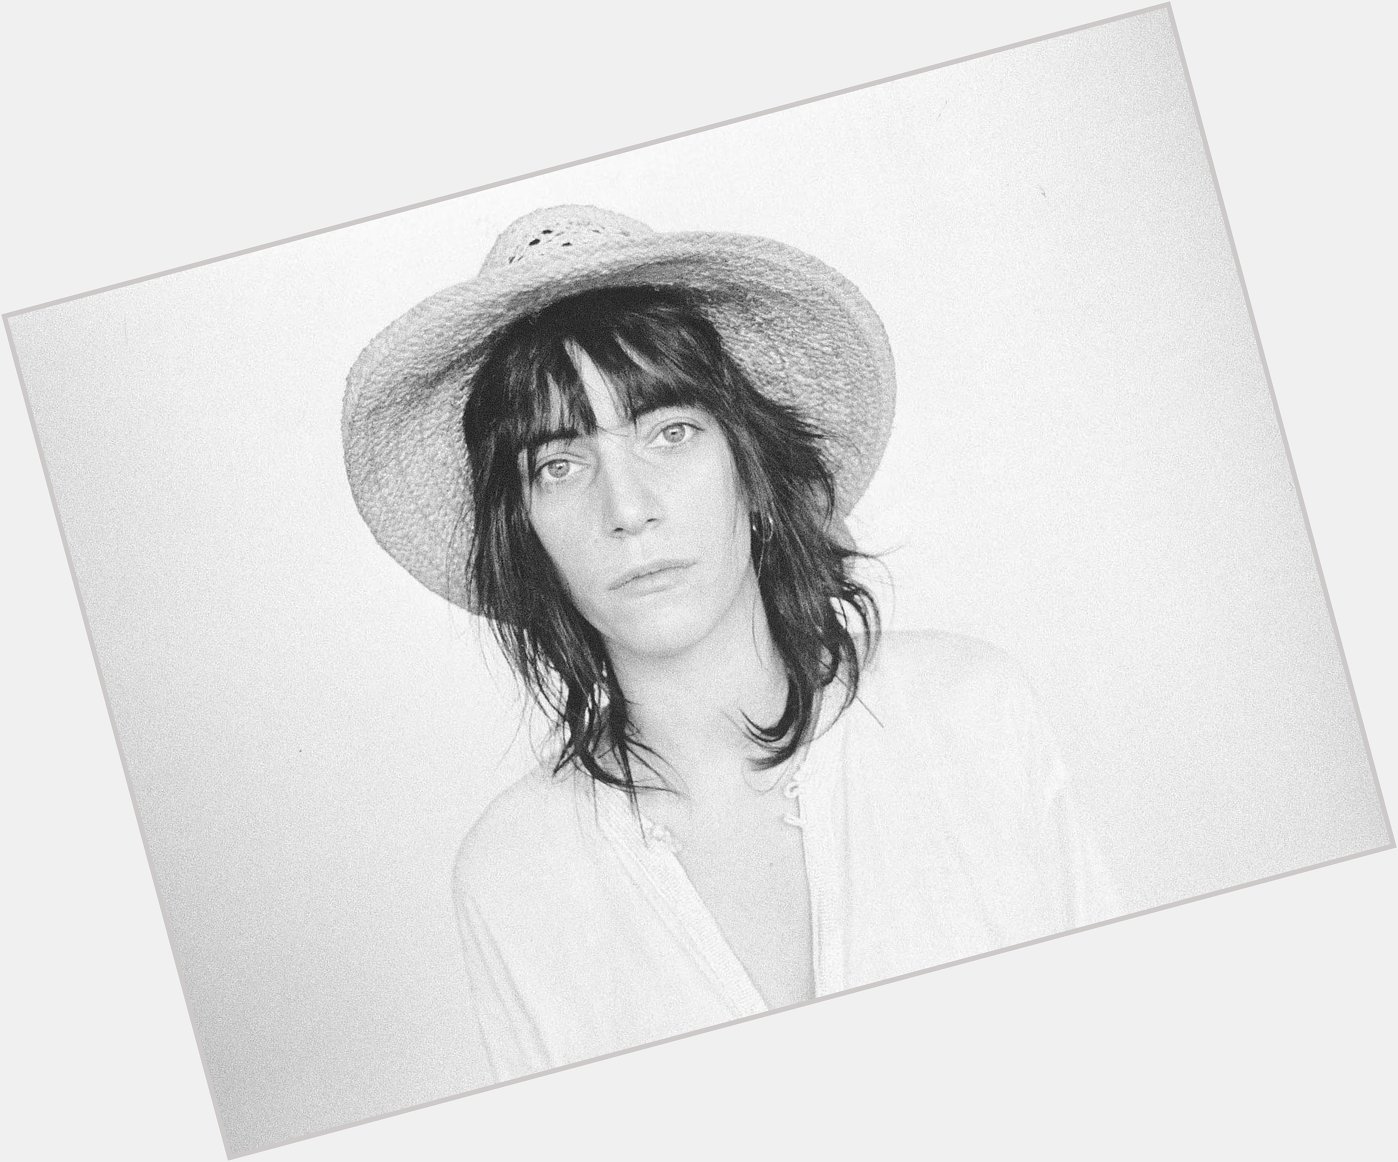 Happy 68th birthday to the Godmother of Patti Smith! 